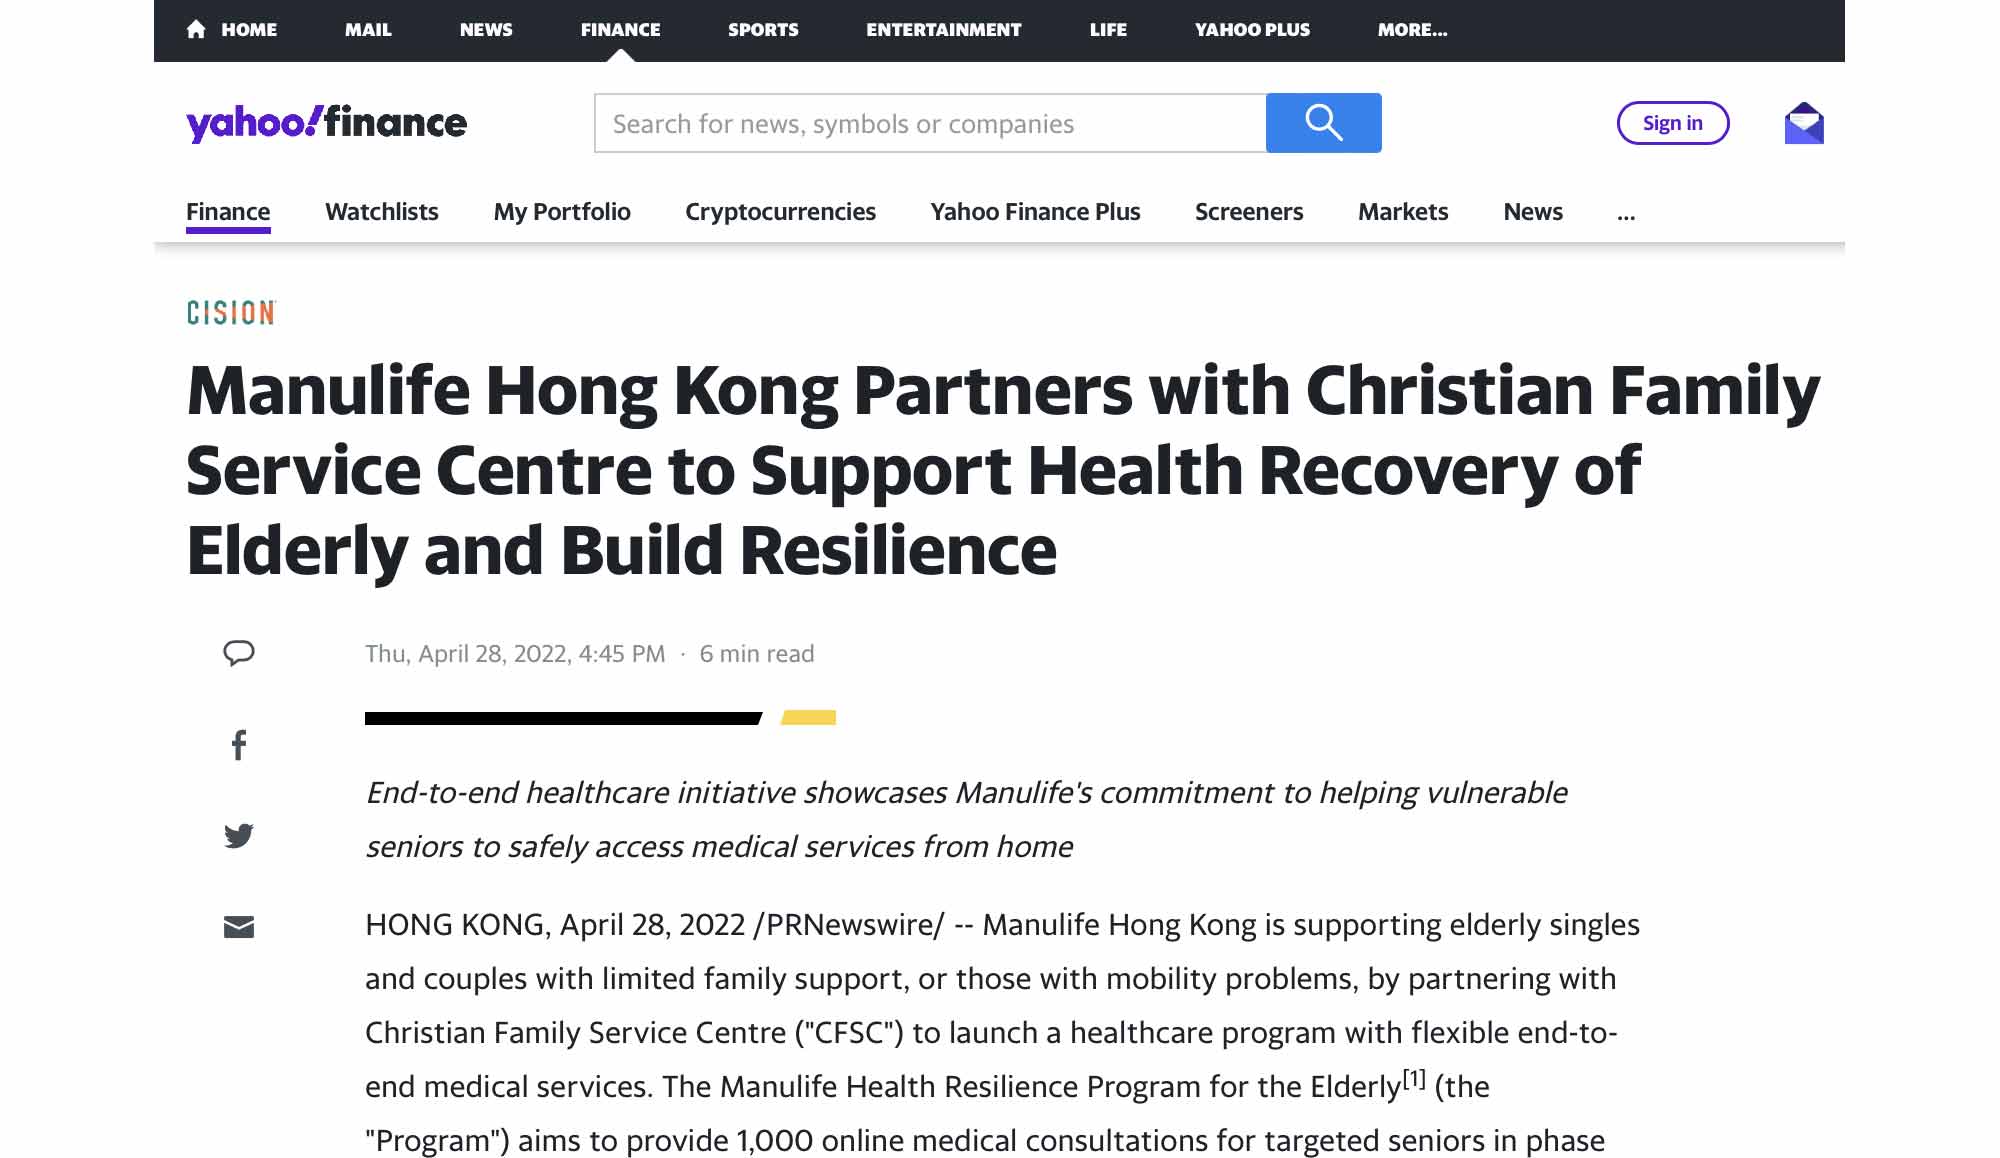 Cover Image - Yahoo! Finance - Manulife Hong Kong Partners with Christian Family Service Centre to Support Health Recovery of Elderly and Build Resilience